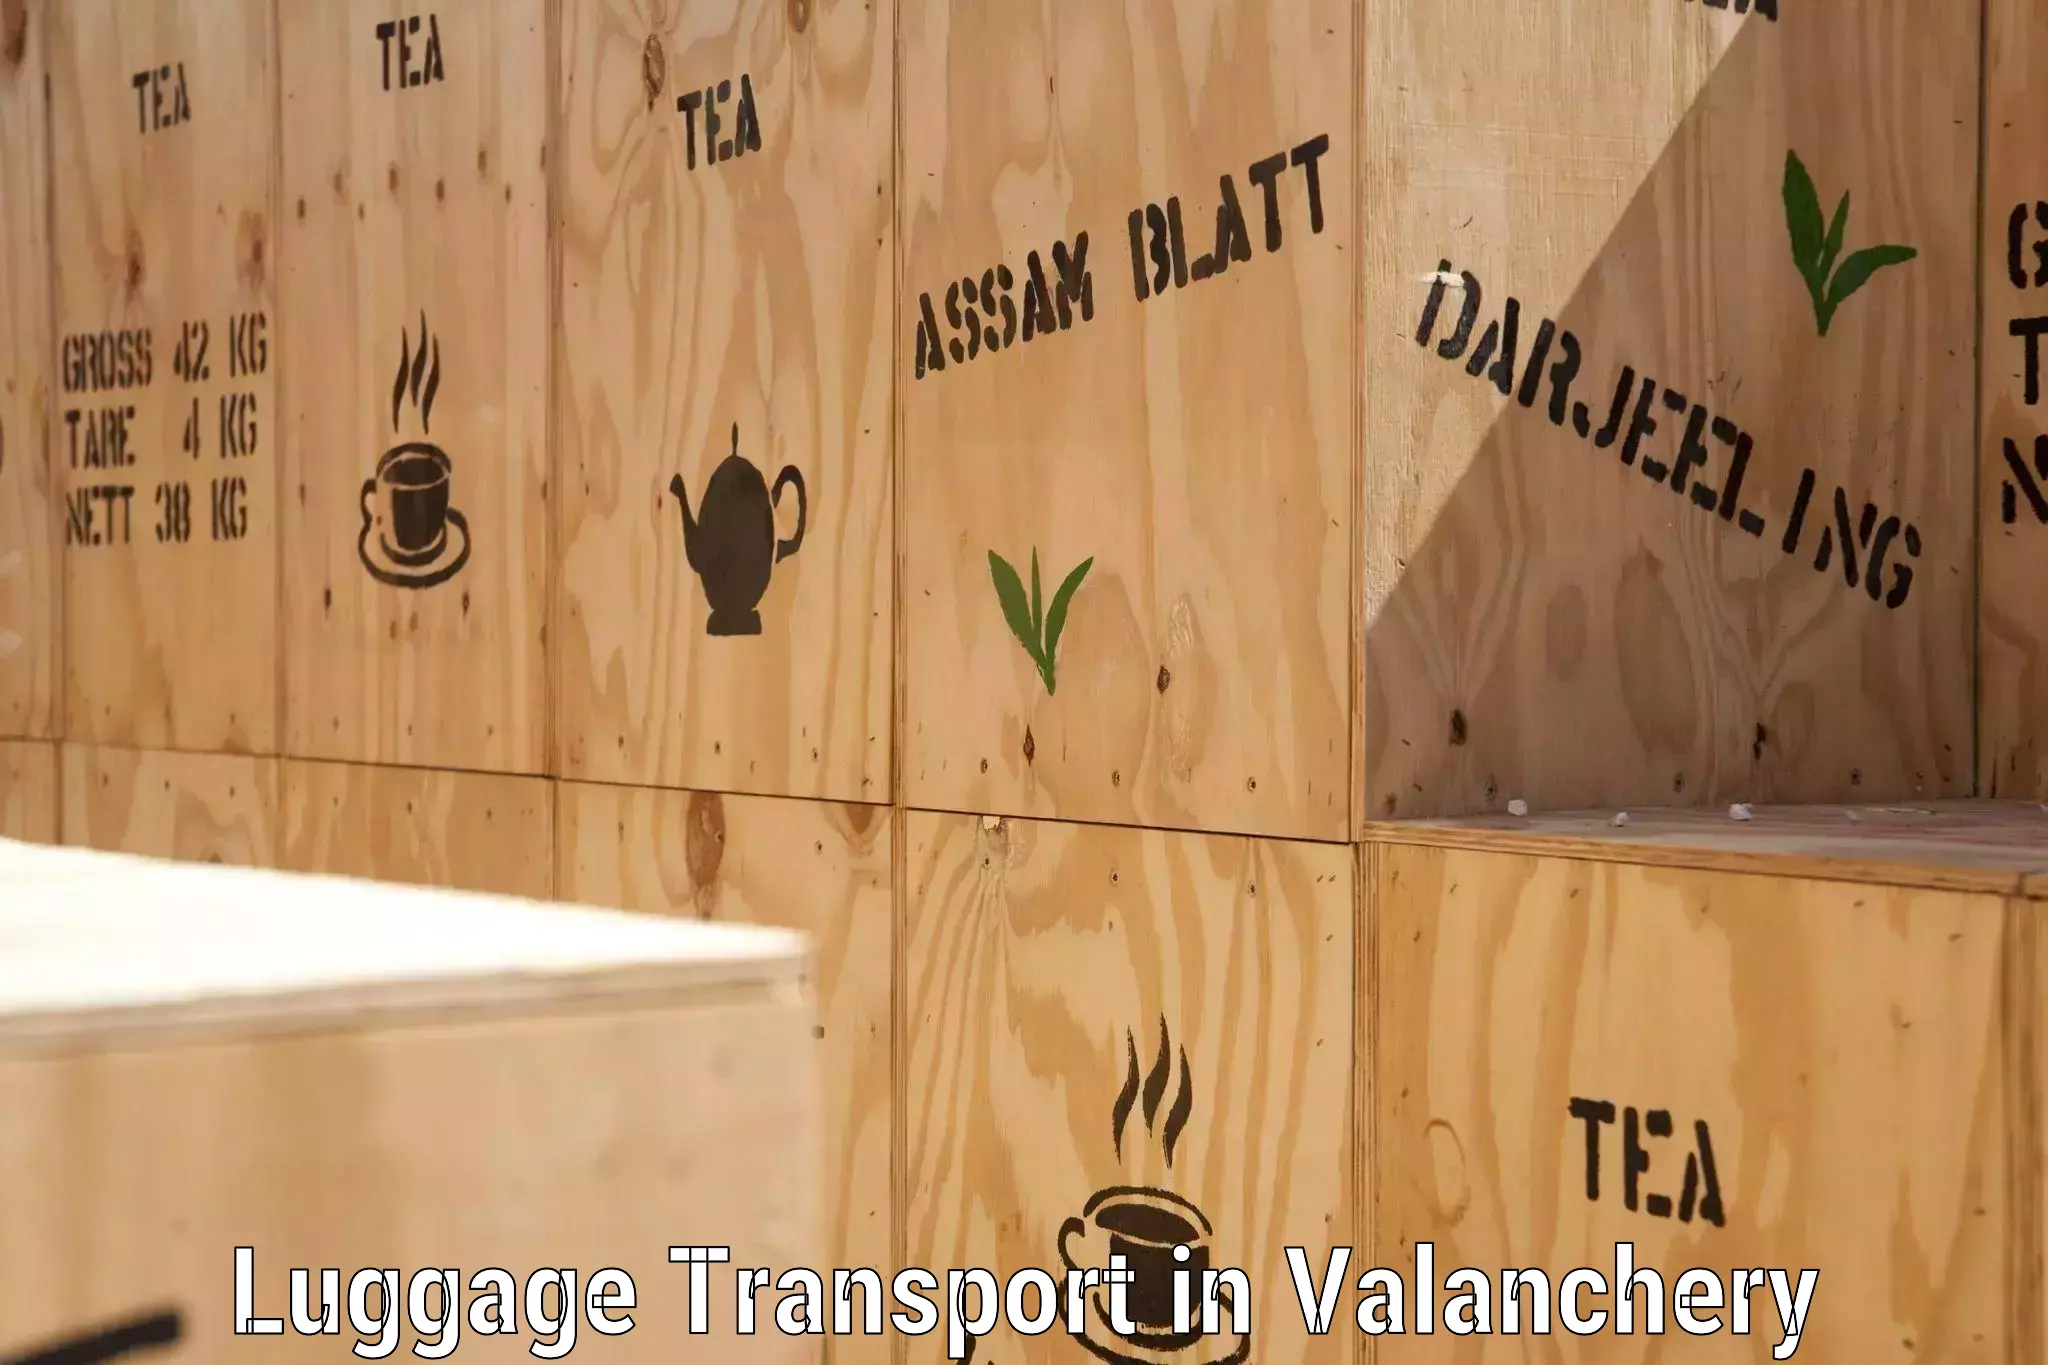 Luggage delivery news in Valanchery